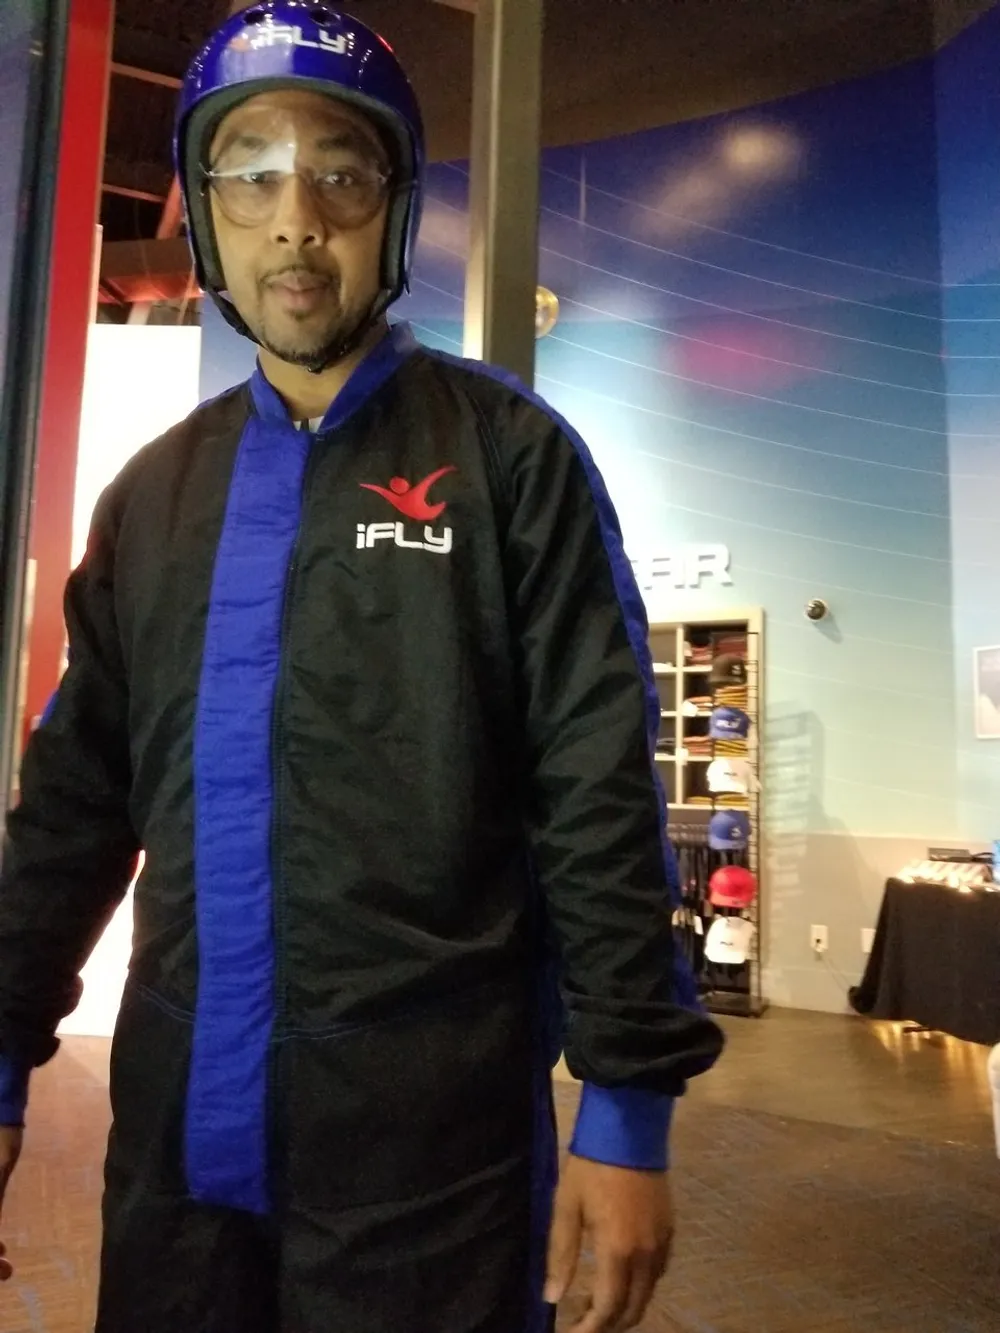 A person is wearing a blue helmet and an iFLY branded flight suit possibly preparing for or having just experienced an indoor skydiving session